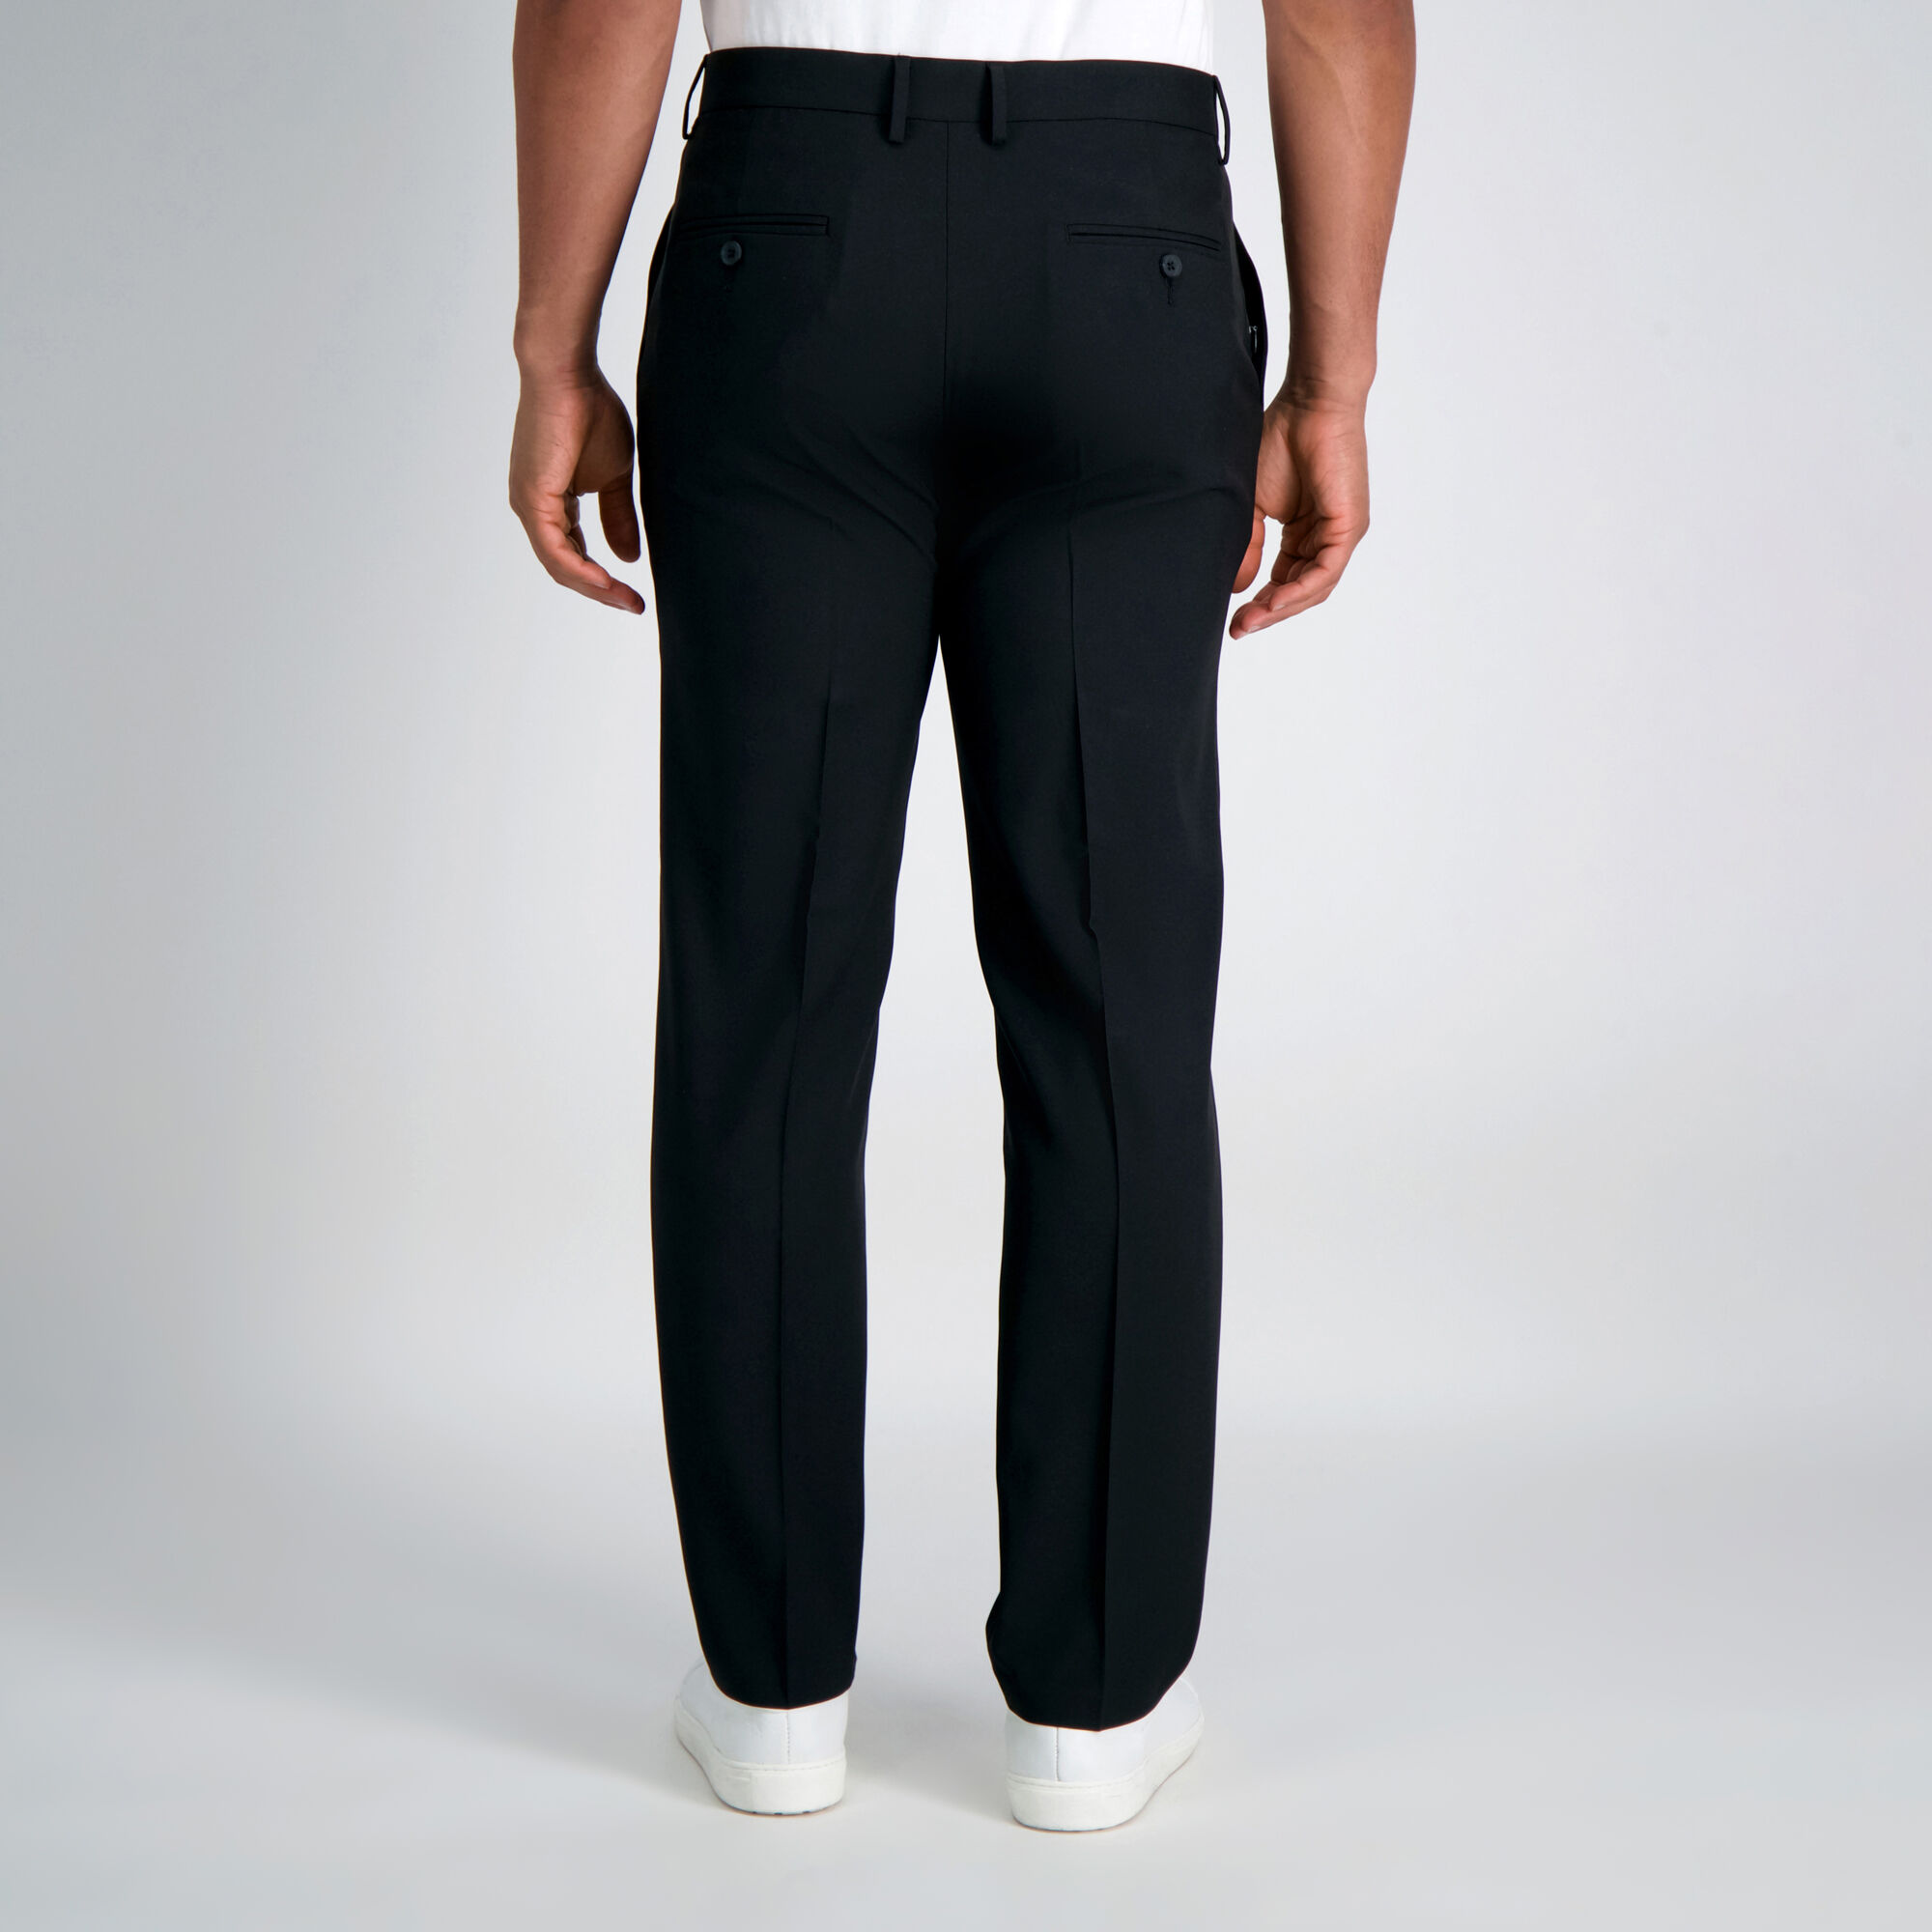 The Active Series™ Performance Pant